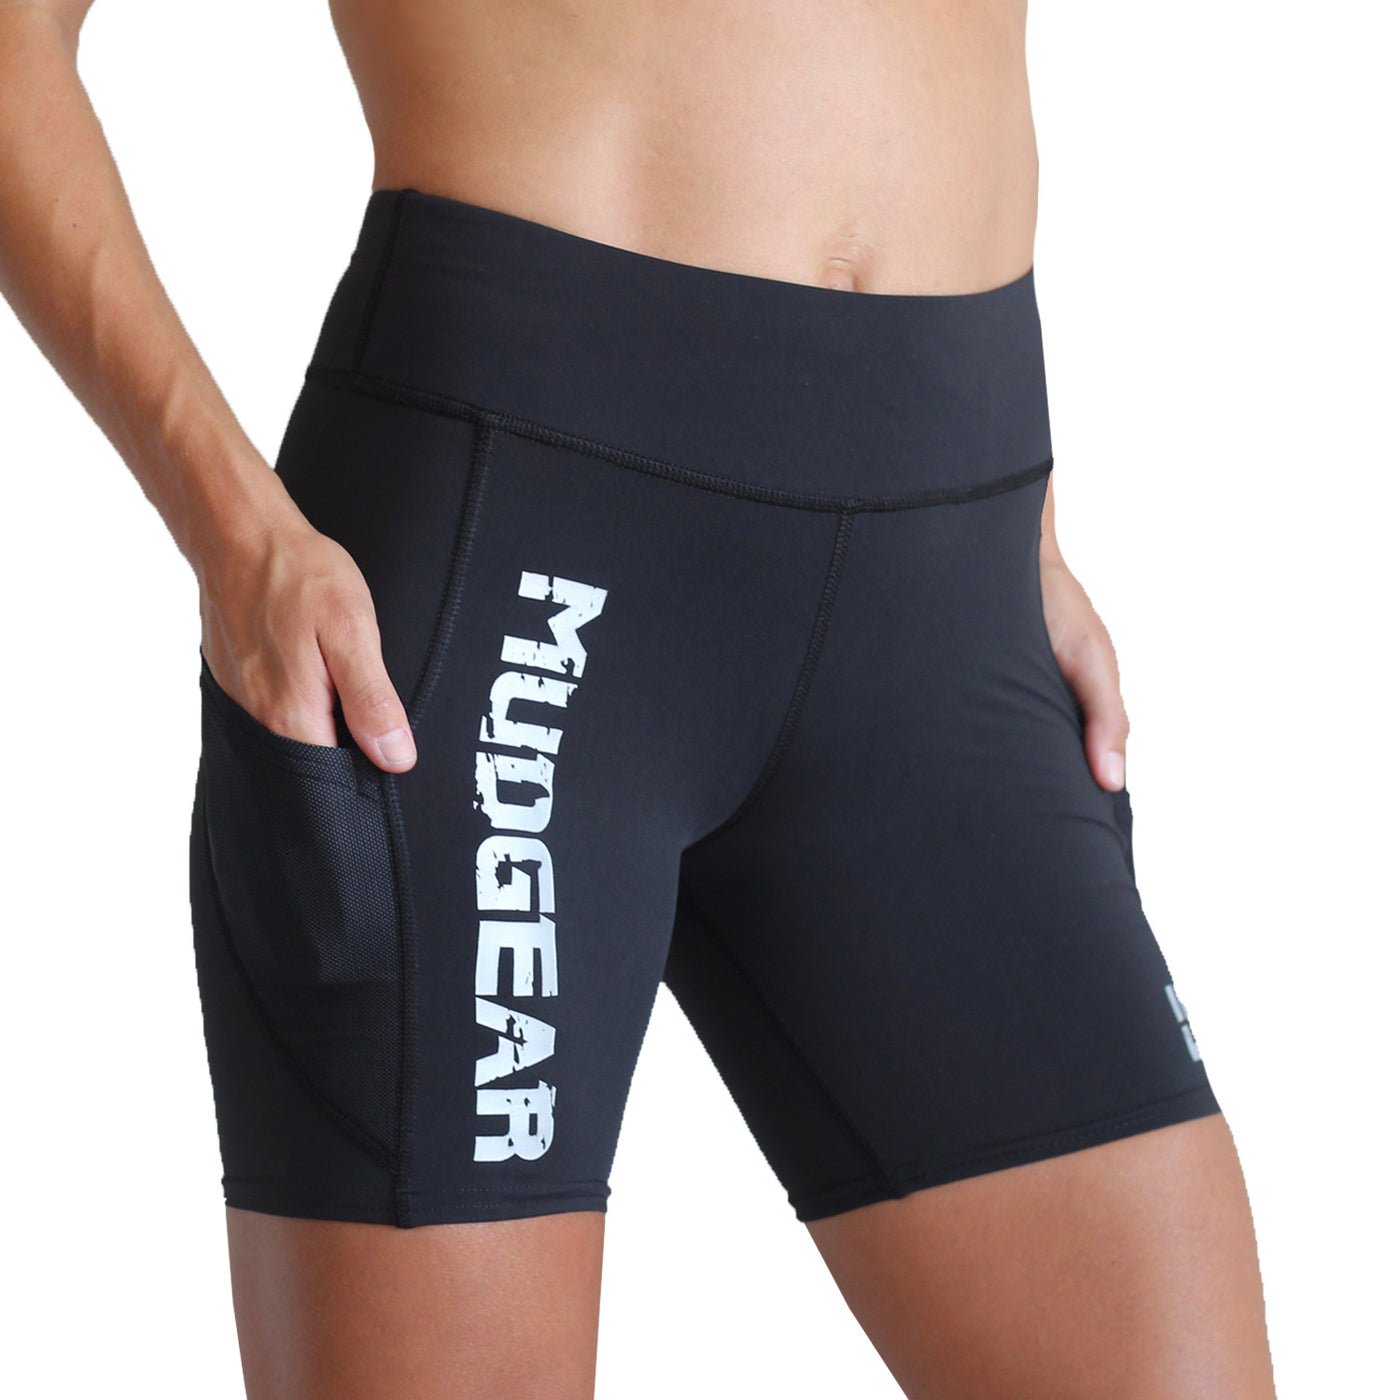 Compression Shorts for women